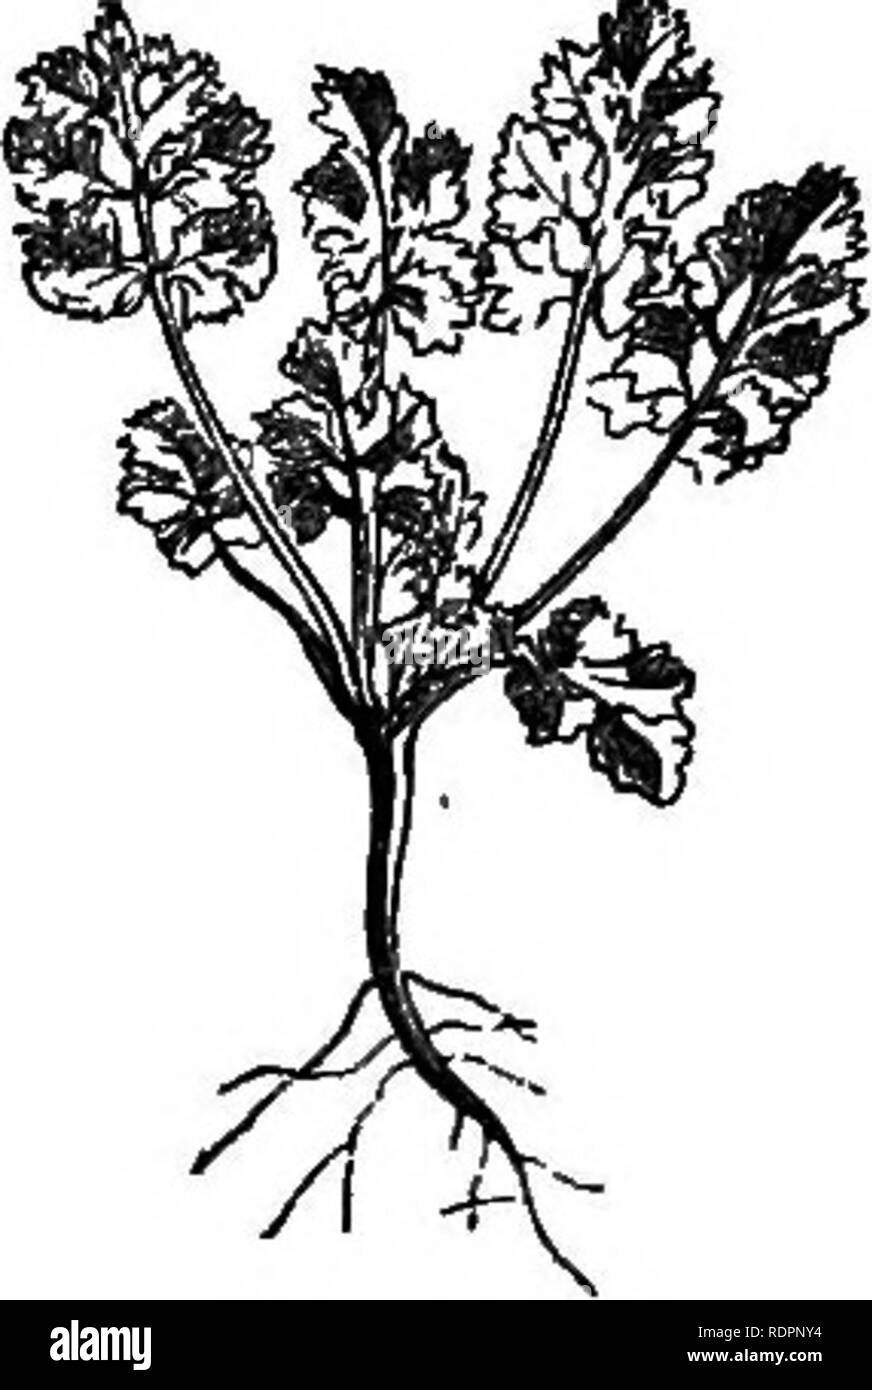 . My garden, its plan and culture together with a general description of its geology, botany, and natural history. Gardening. Fig. 127.—Australian Cress. Fig. 128.—Curled Cress. The Curled Cress {Lepidium sativum, fig. 128) is also used for salad, and is likewise good in early spring, especially when grown in the orchard-house. We always grow a reasonable proportion. Where water-cresses cannot be obtained, the American Cress {Barbarea prcecox) may be grown ; otherwise it may be dispensed with altogether, as an- inferior salad plant. The Lettuce {Lactuca sativd) is a highly important salad plan Stock Photo